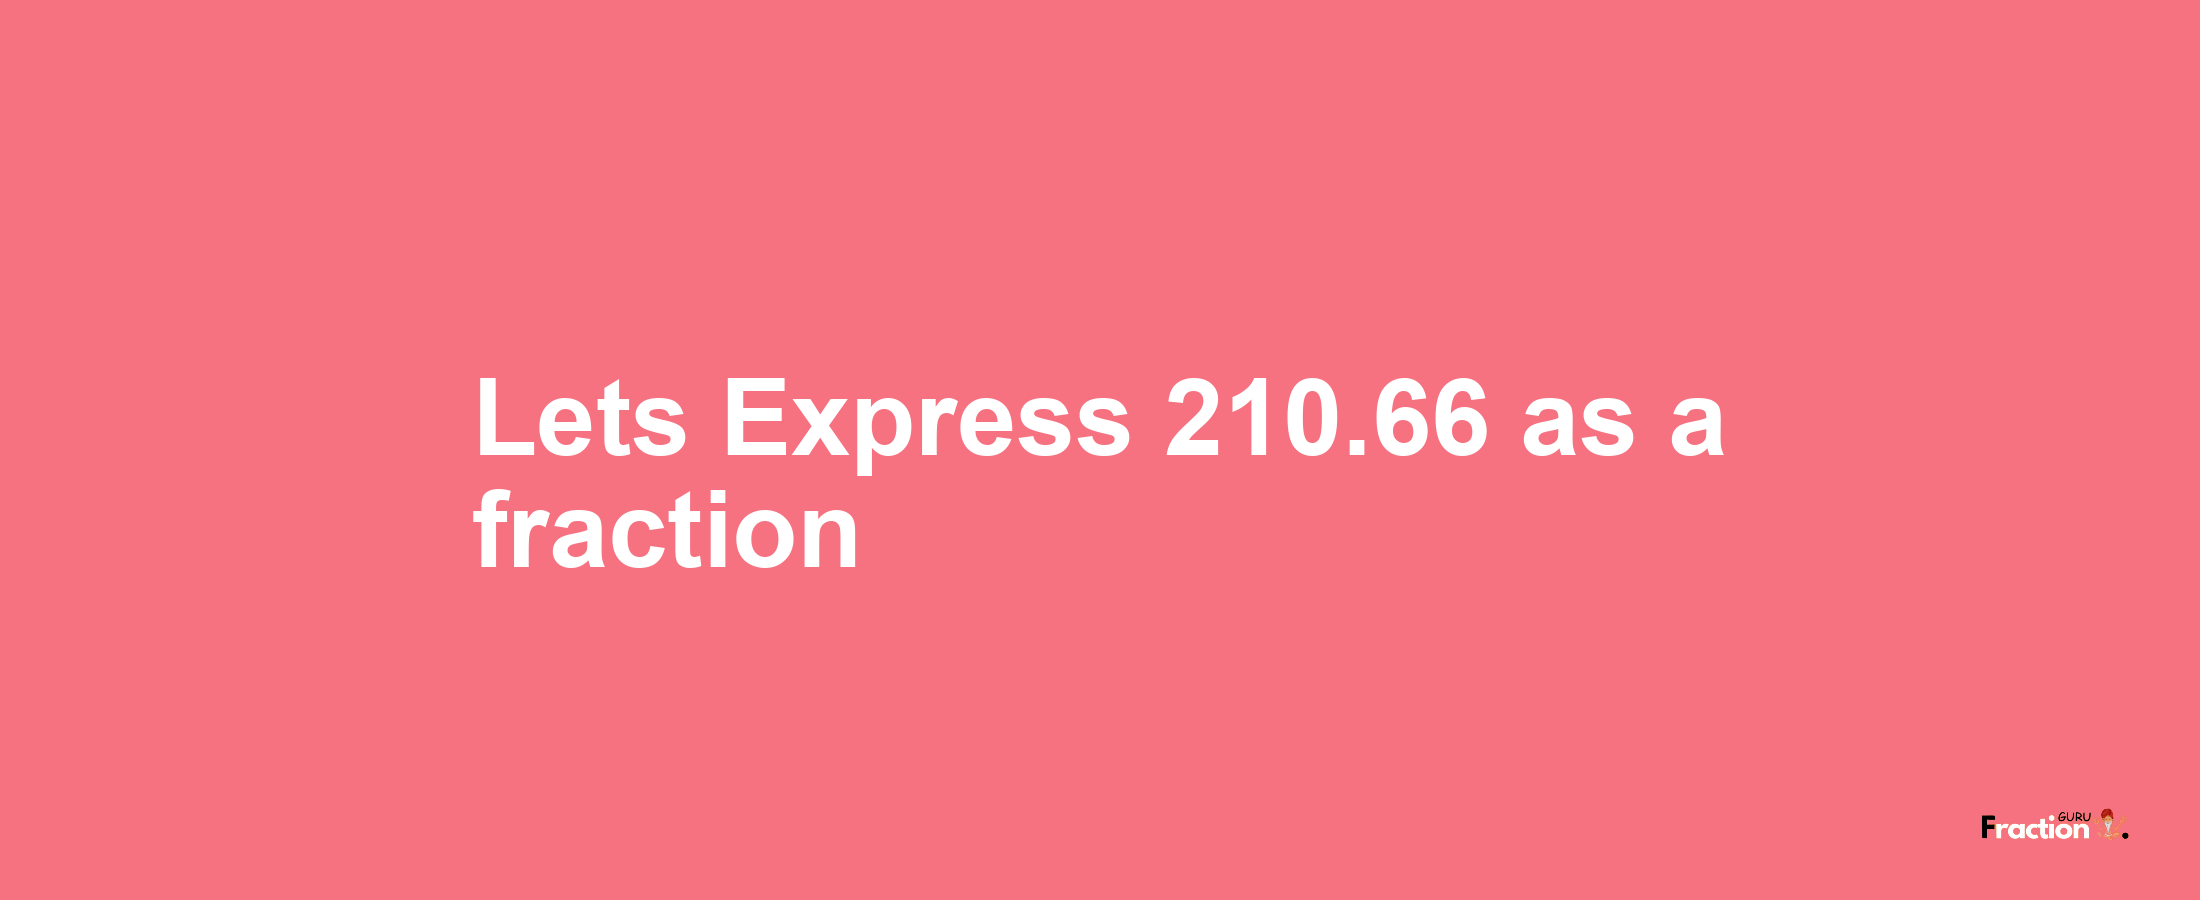 Lets Express 210.66 as afraction